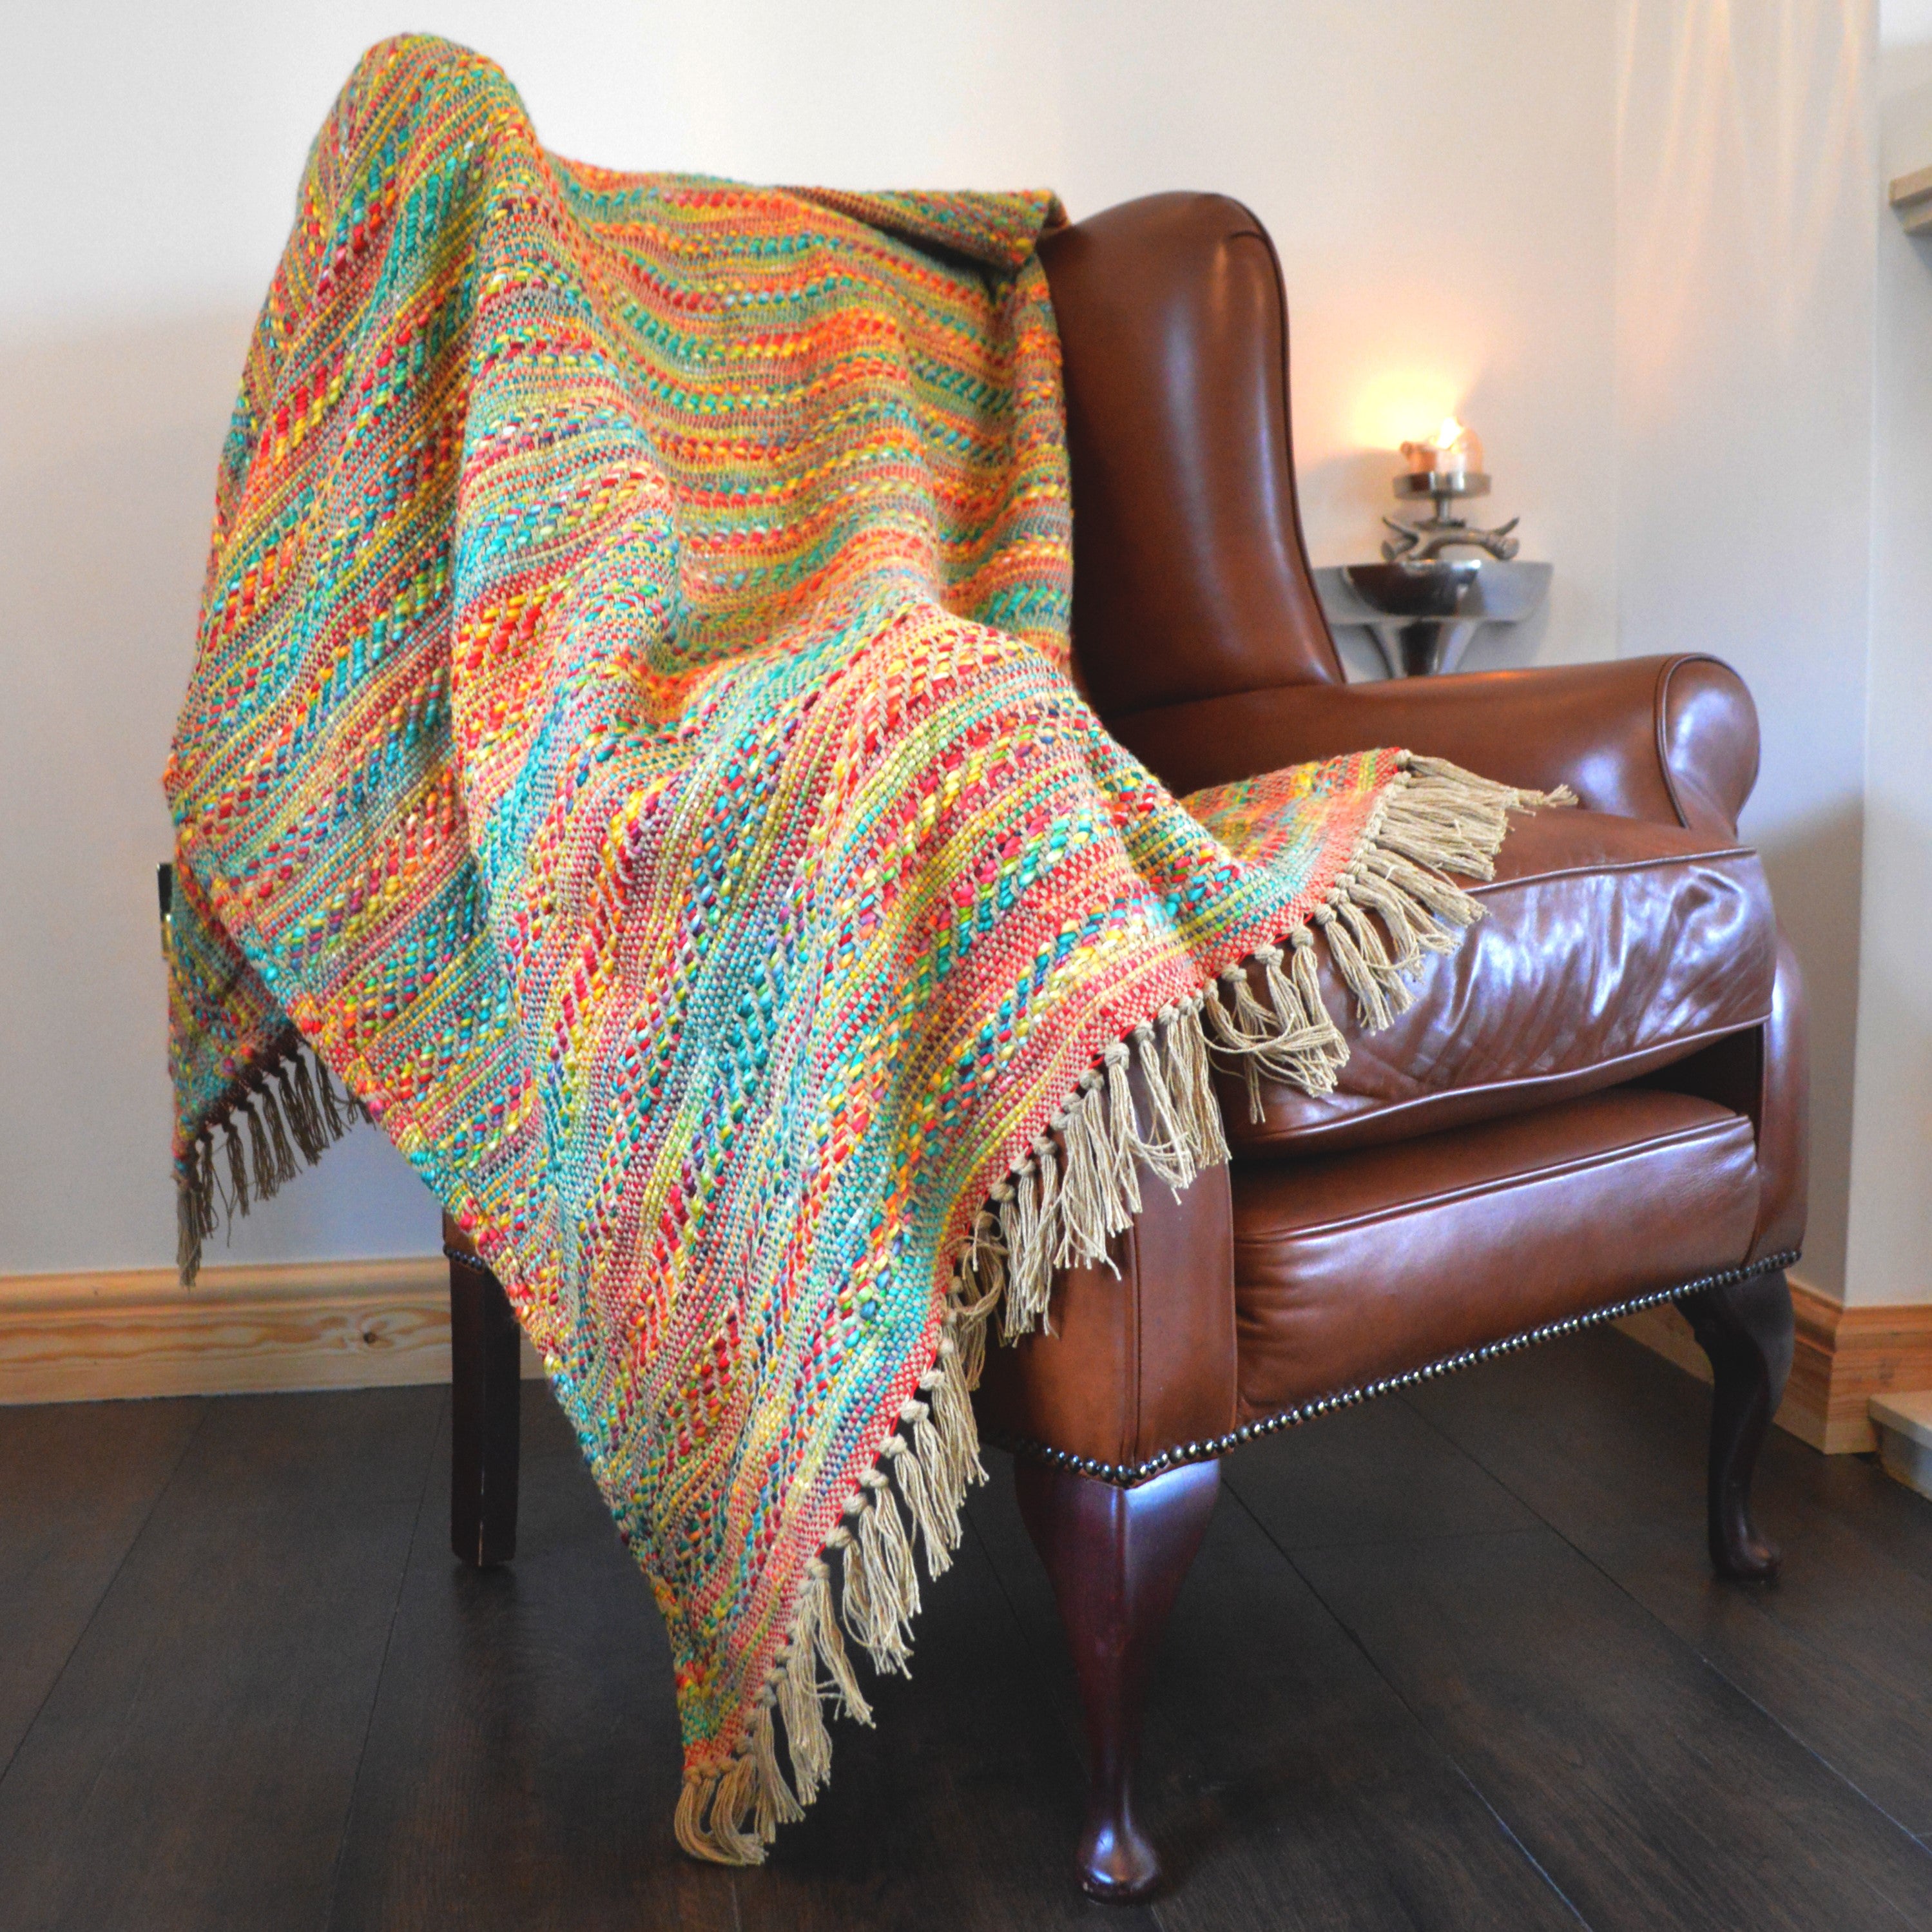 Colouful Throw for Living Room - Stylish blanket with tassels